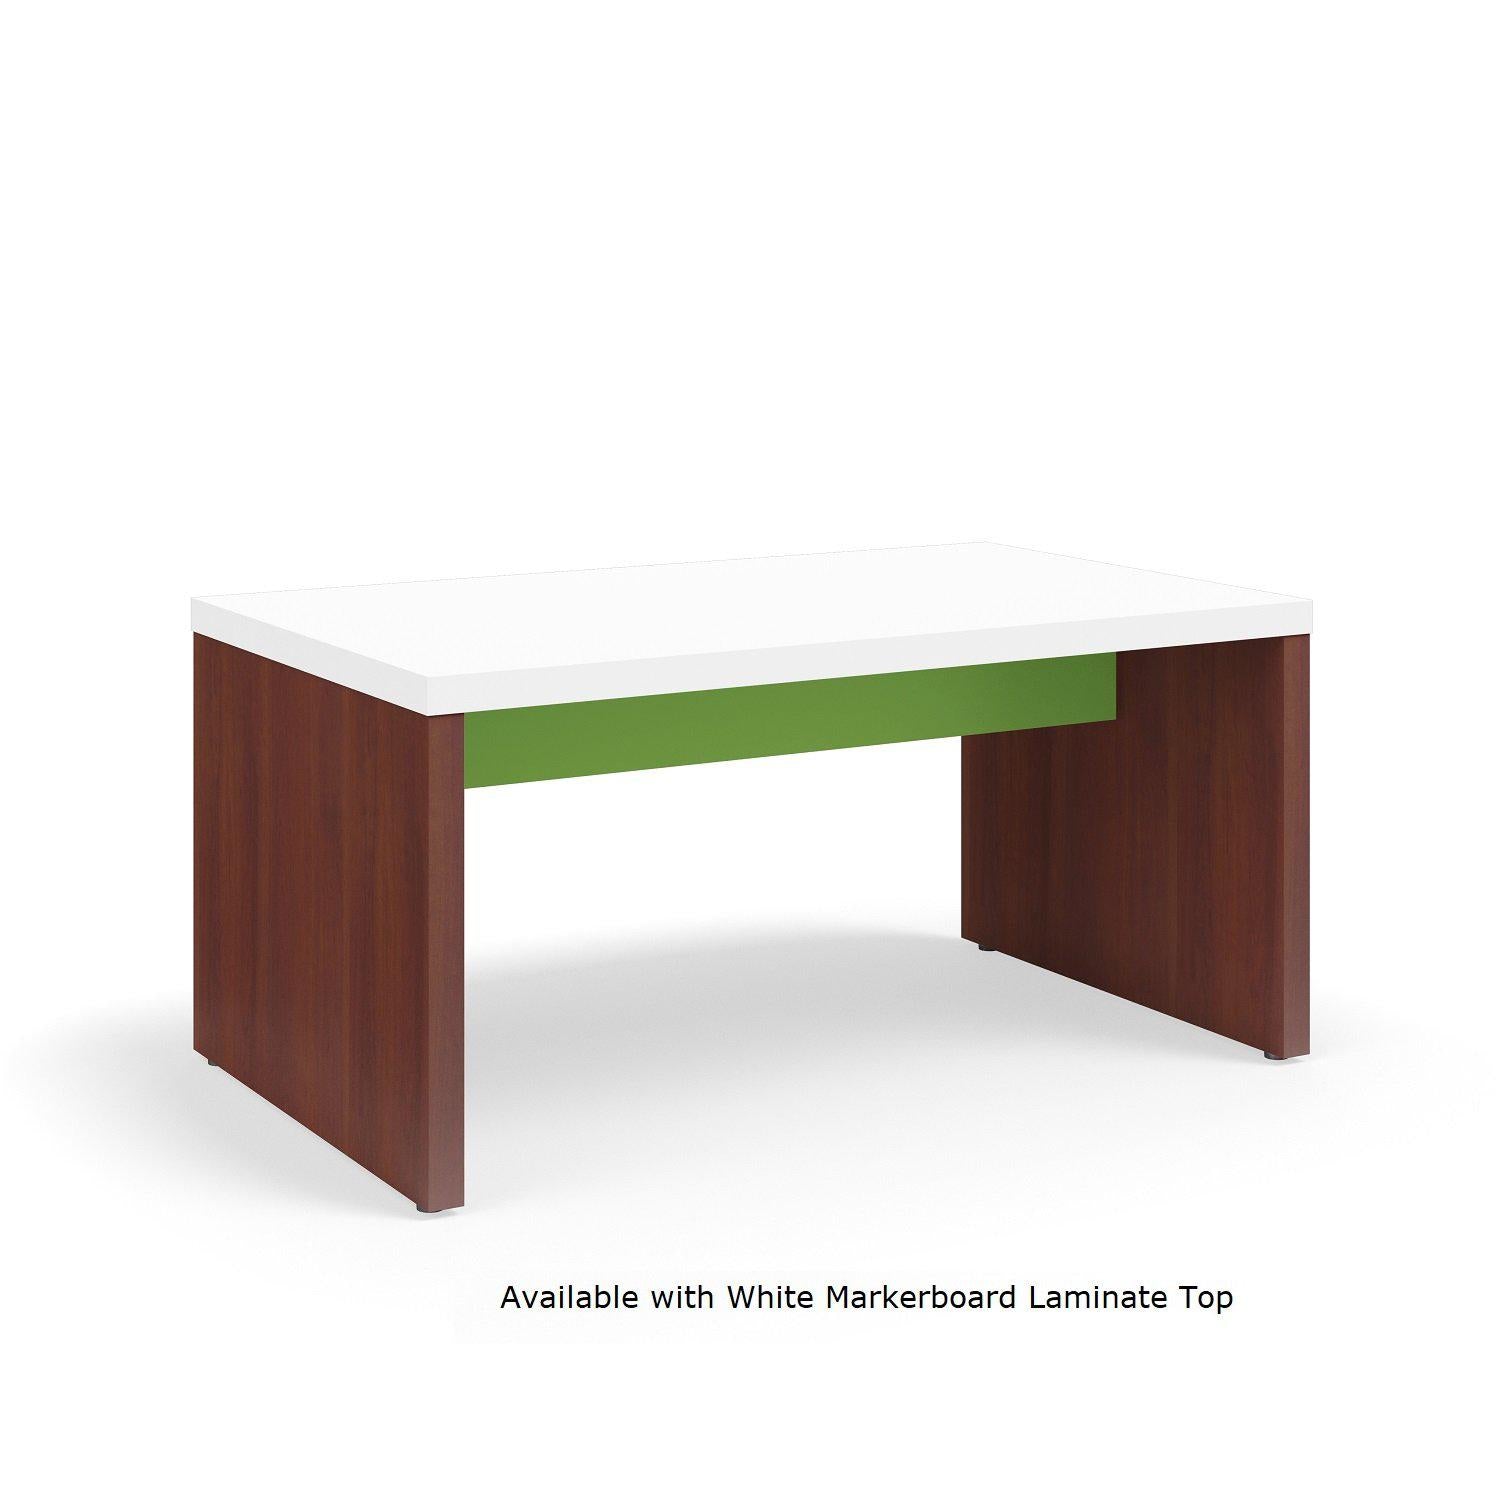 Serenade Gathering Table, Standard Height, Double-Sided, 36" x 60" x 29"H, Contrast Laminate, FREE SHIPPING